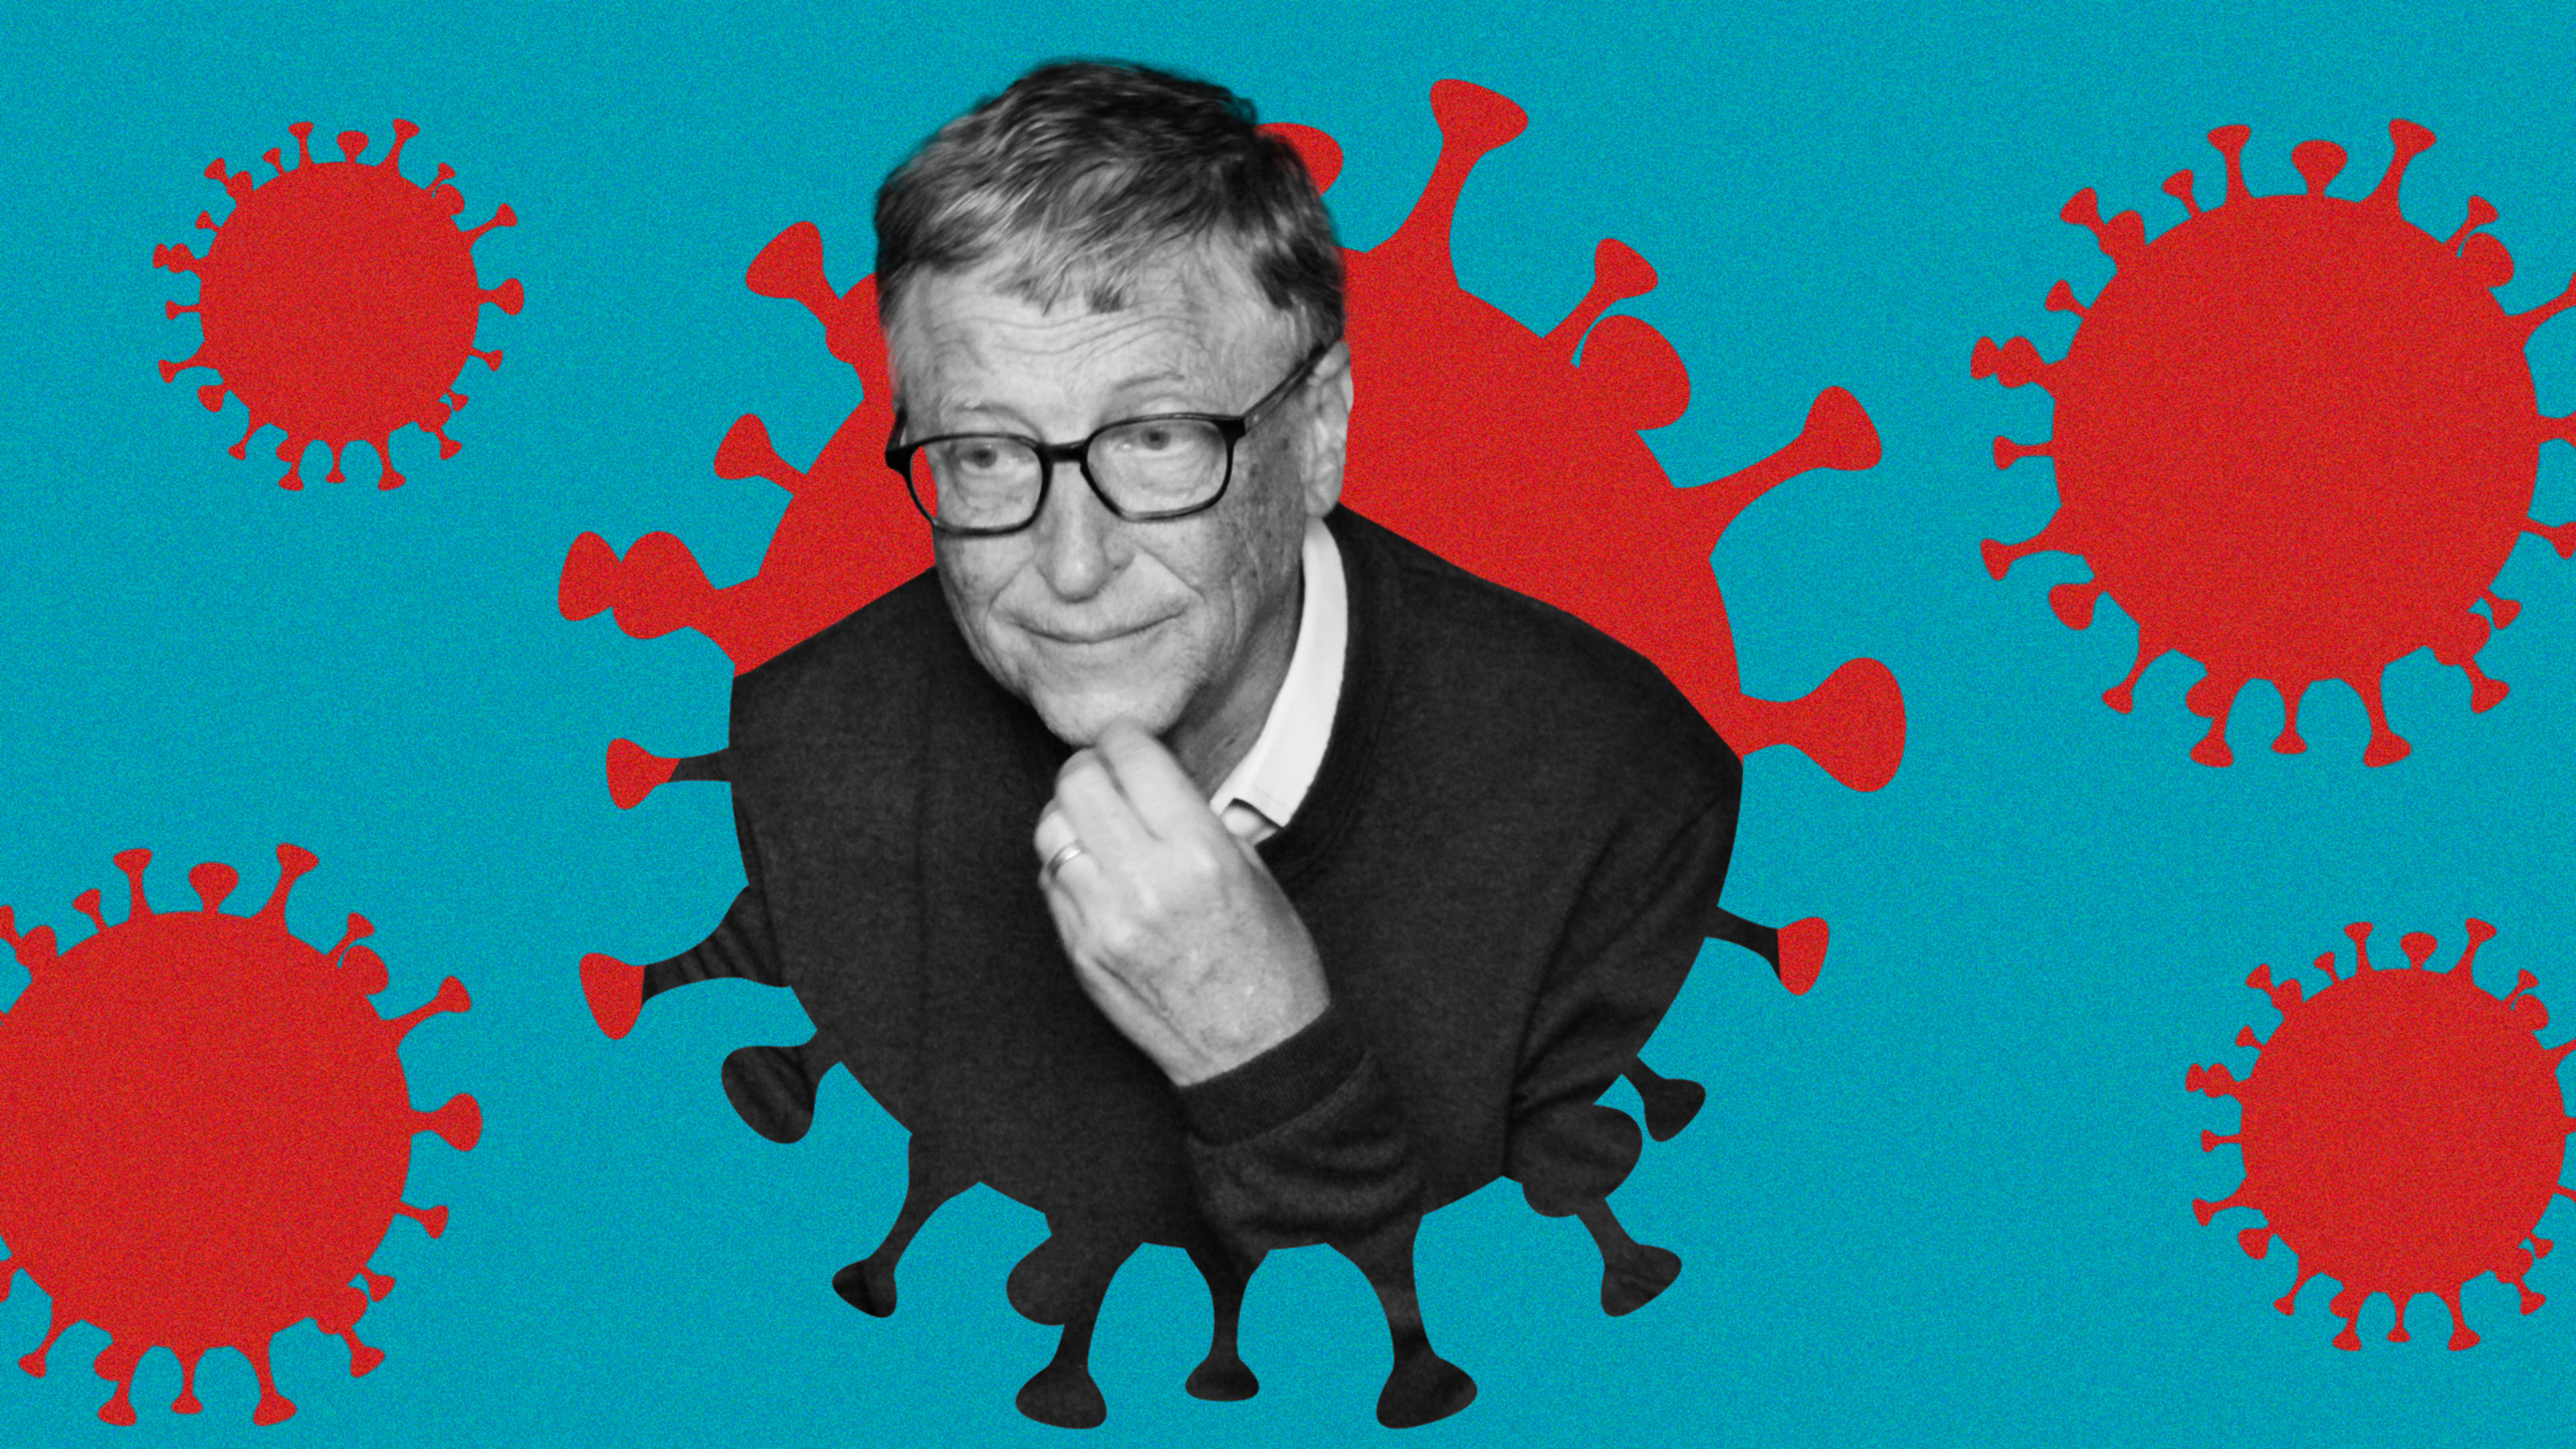 This is Bill Gates’s 3-step plan for beating COVID-19